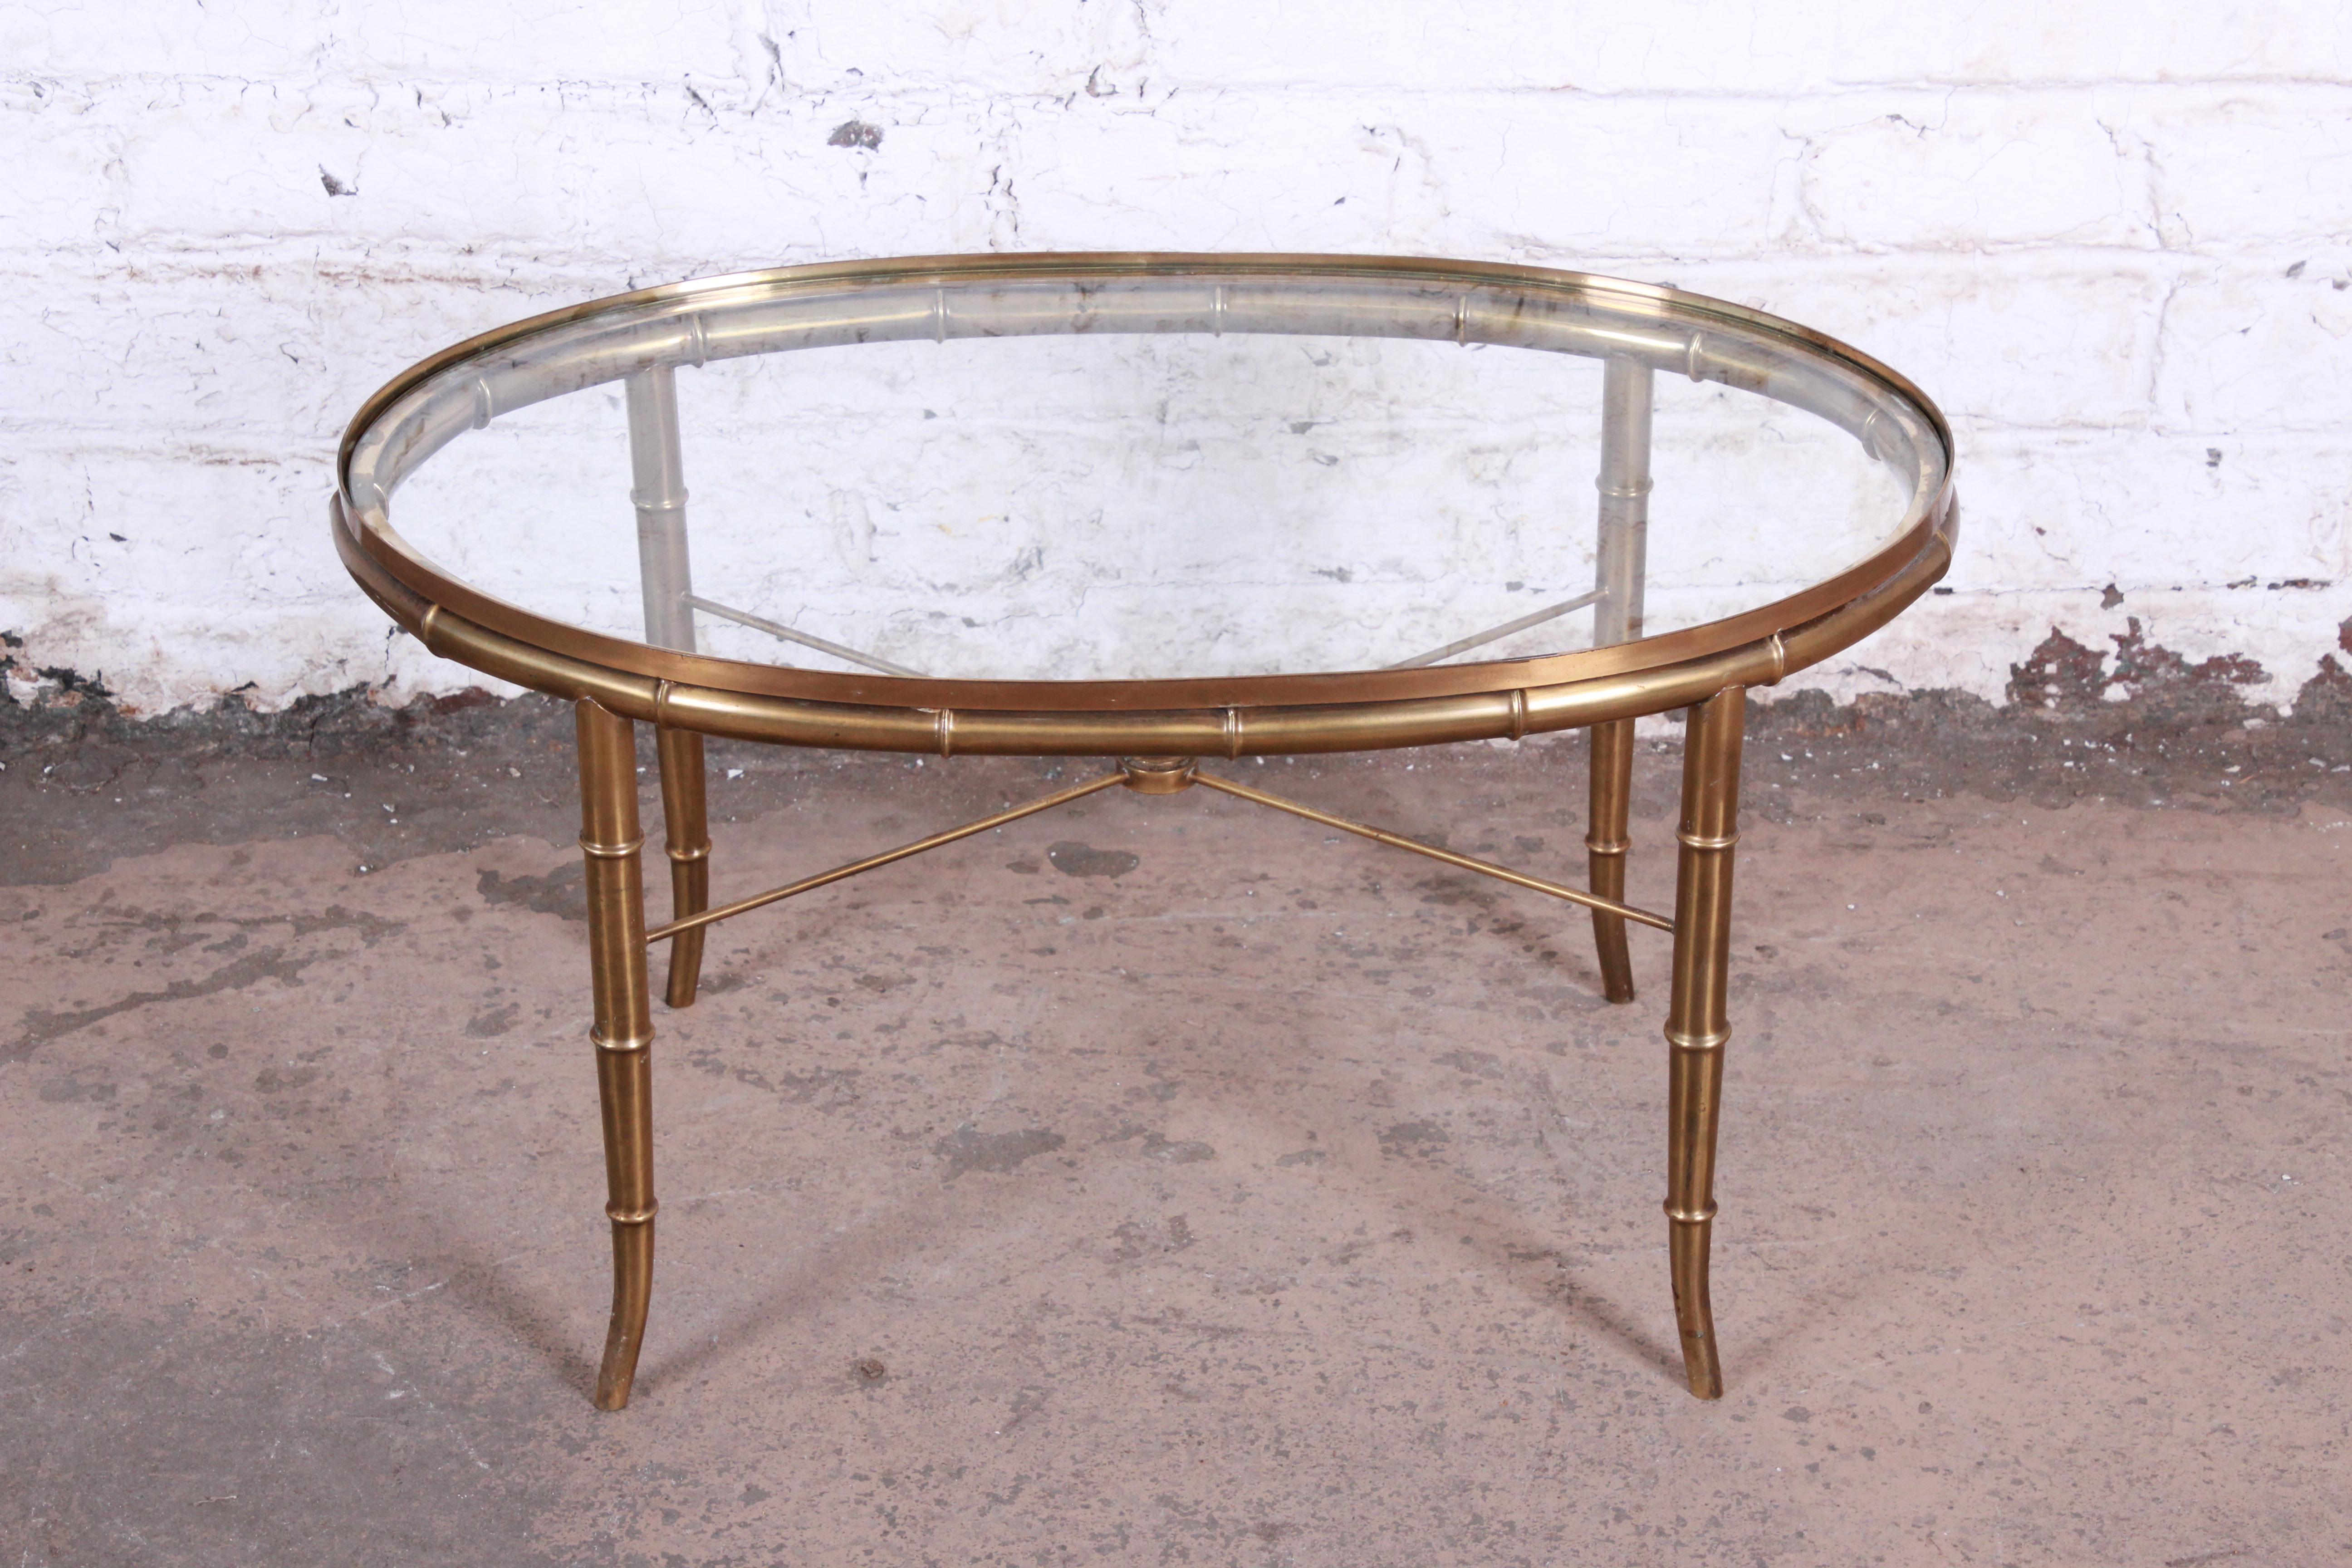 Chinoiserie Mastercraft Hollywood Regency Faux Bamboo Brass Cocktail Table